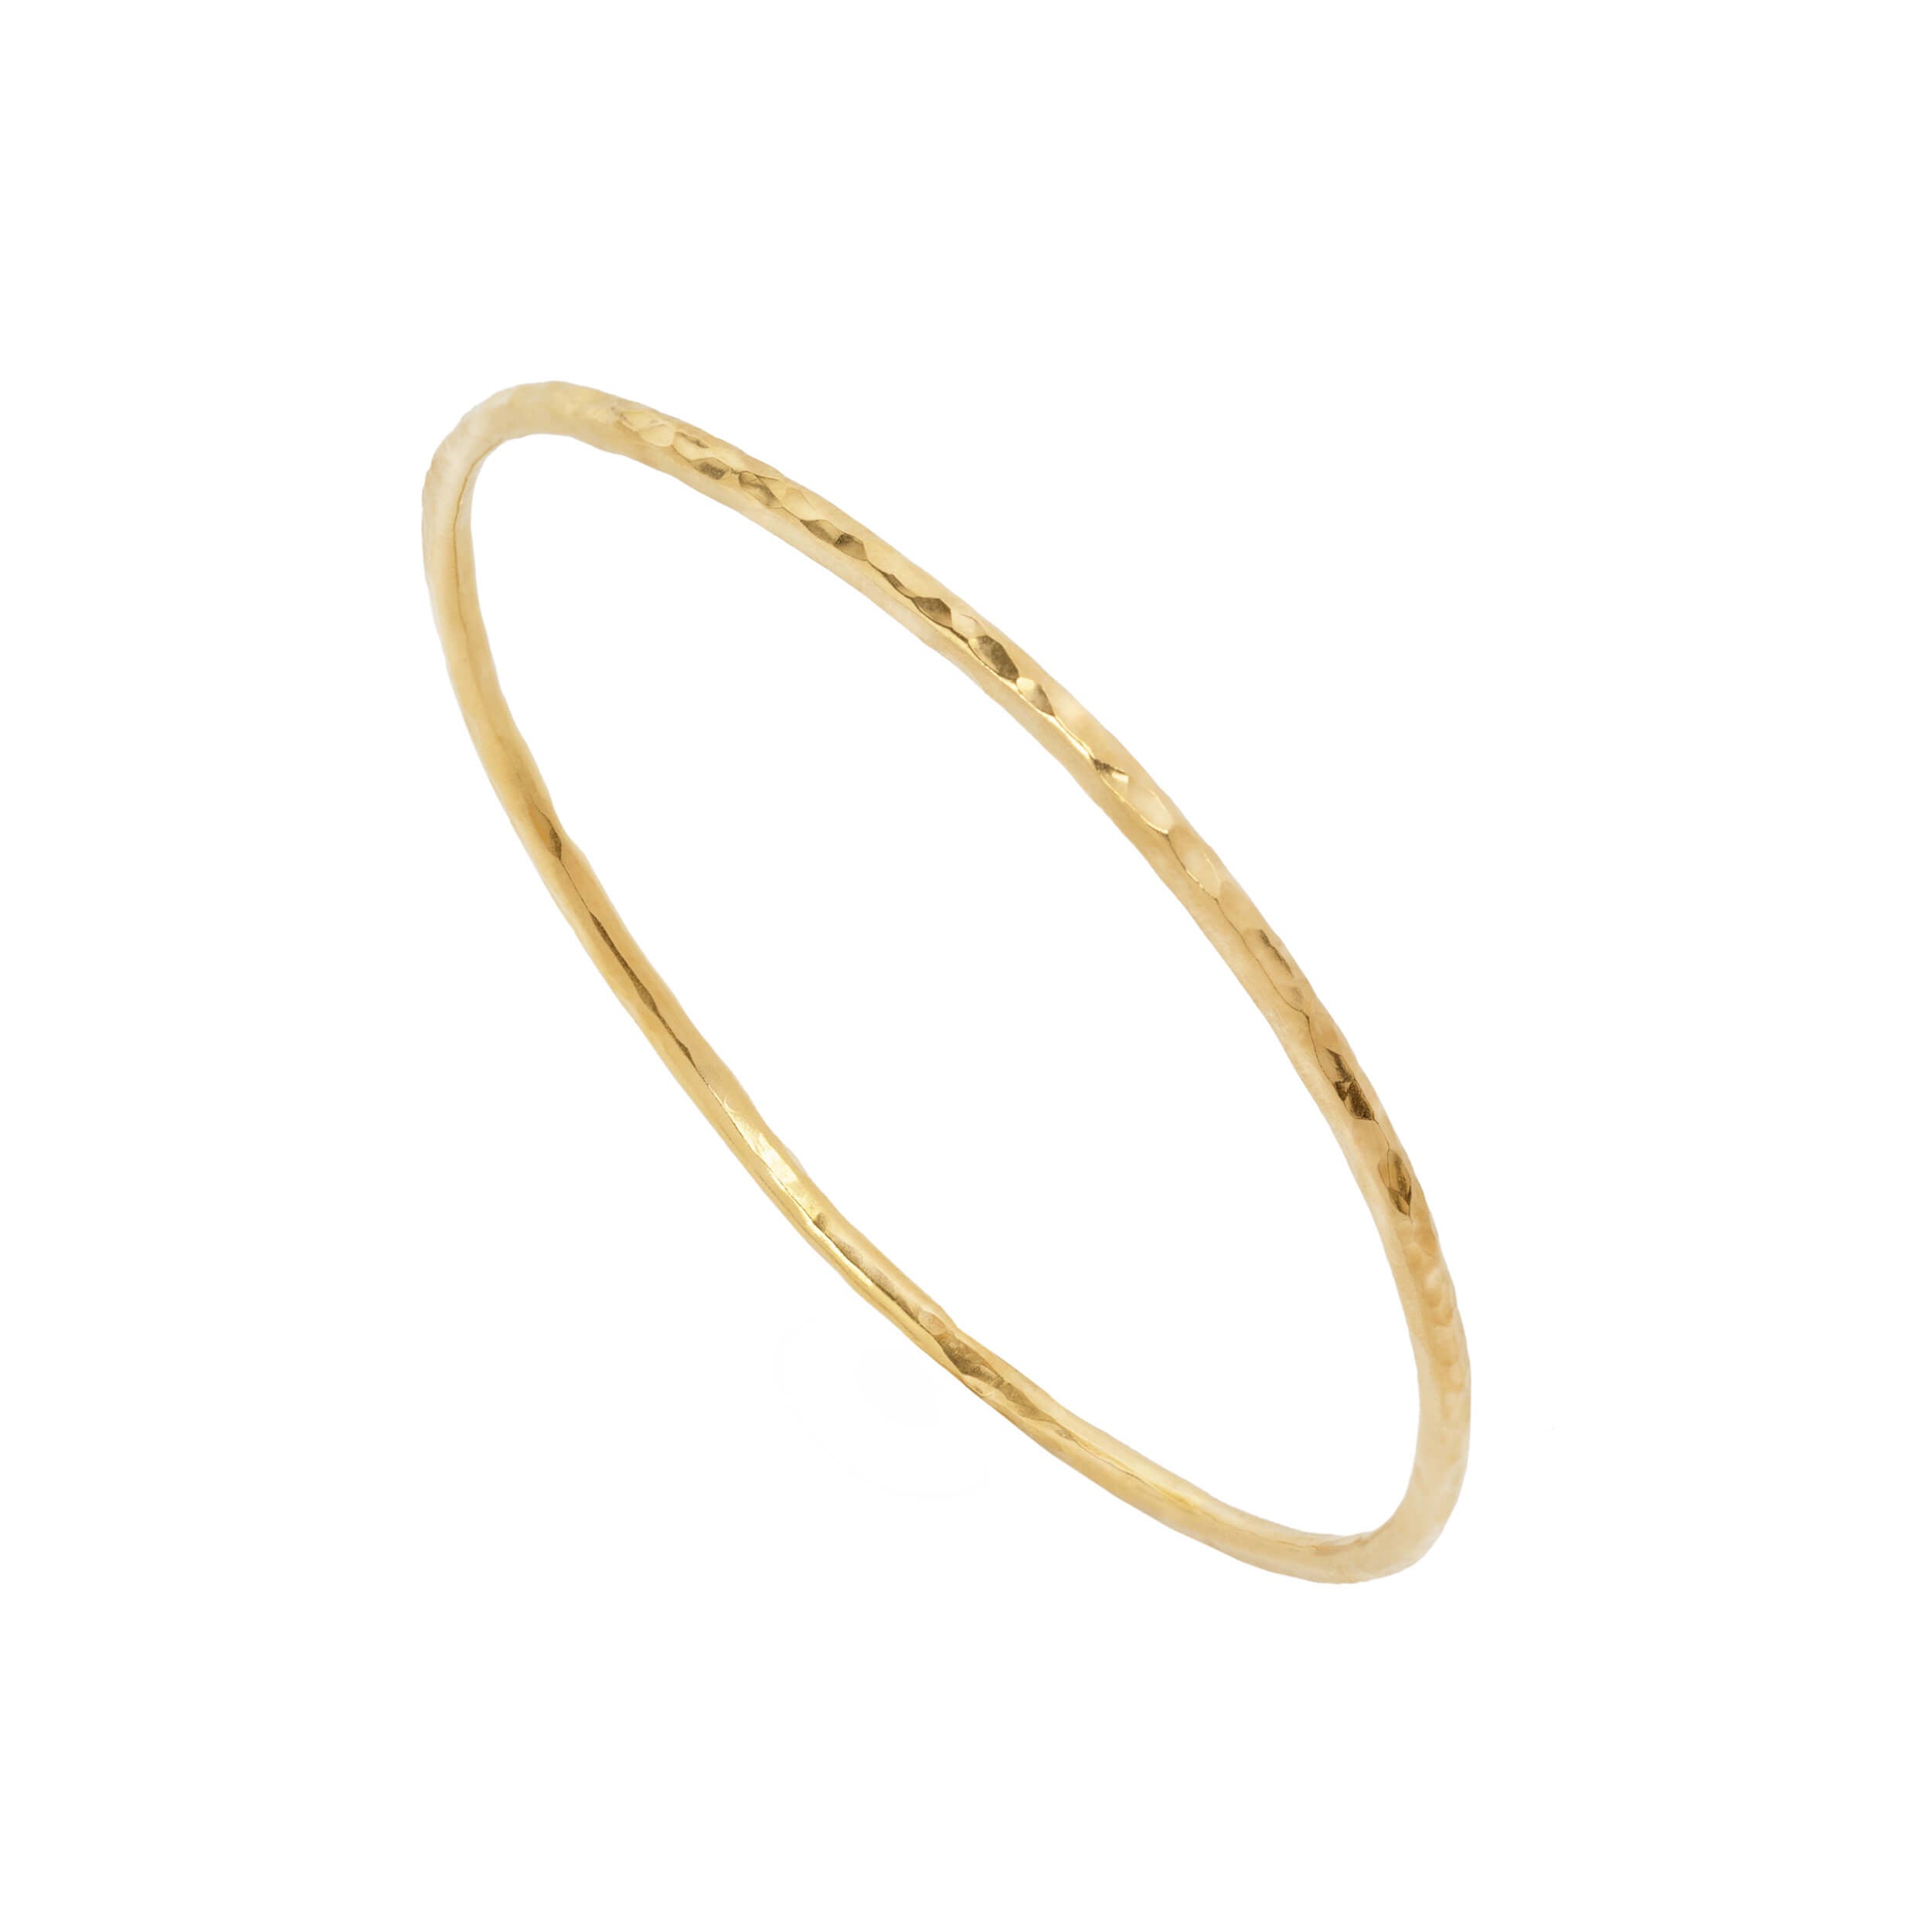 gold rebecca bangle, hammered gold bangle, made in manchester